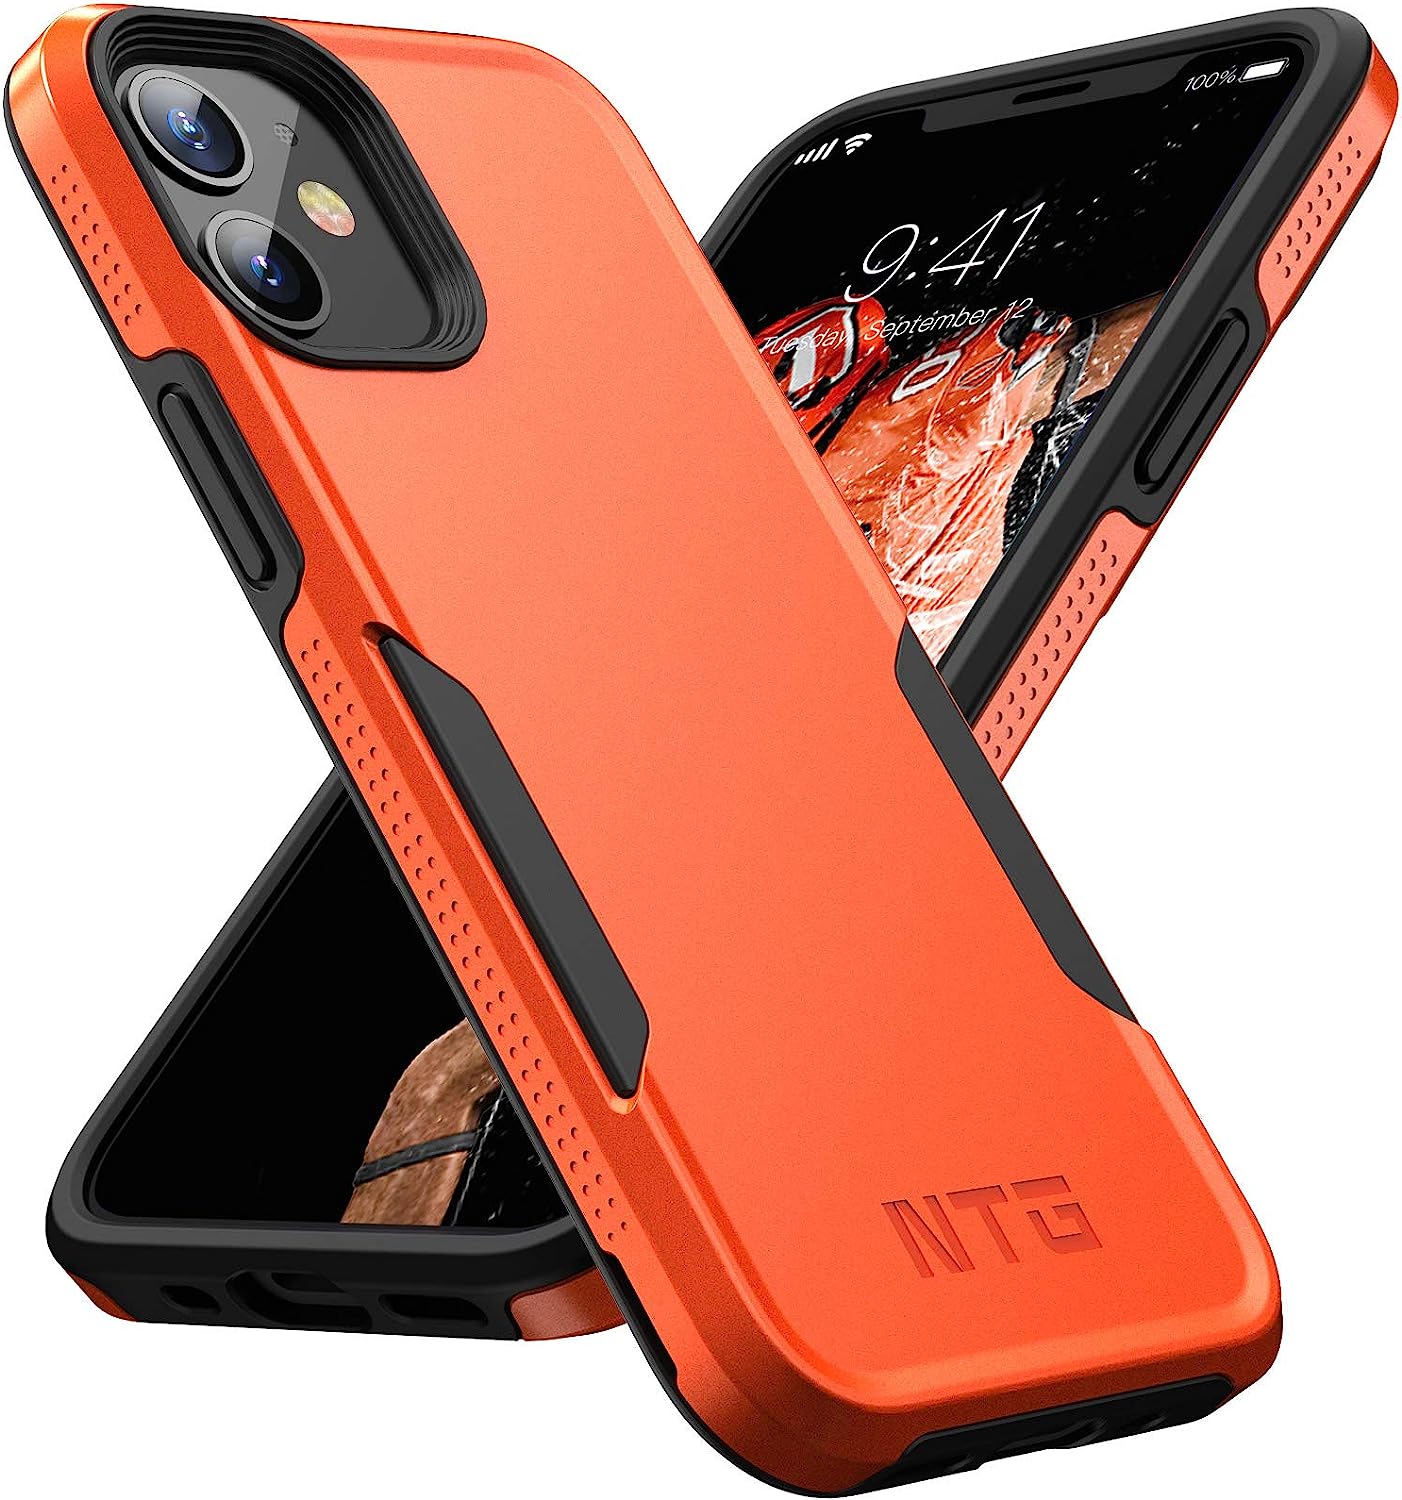 NTG 1st Generation Designed for iPhone 13 Pro Max Case RRP £6.99 CLEARANCE XL £5.99